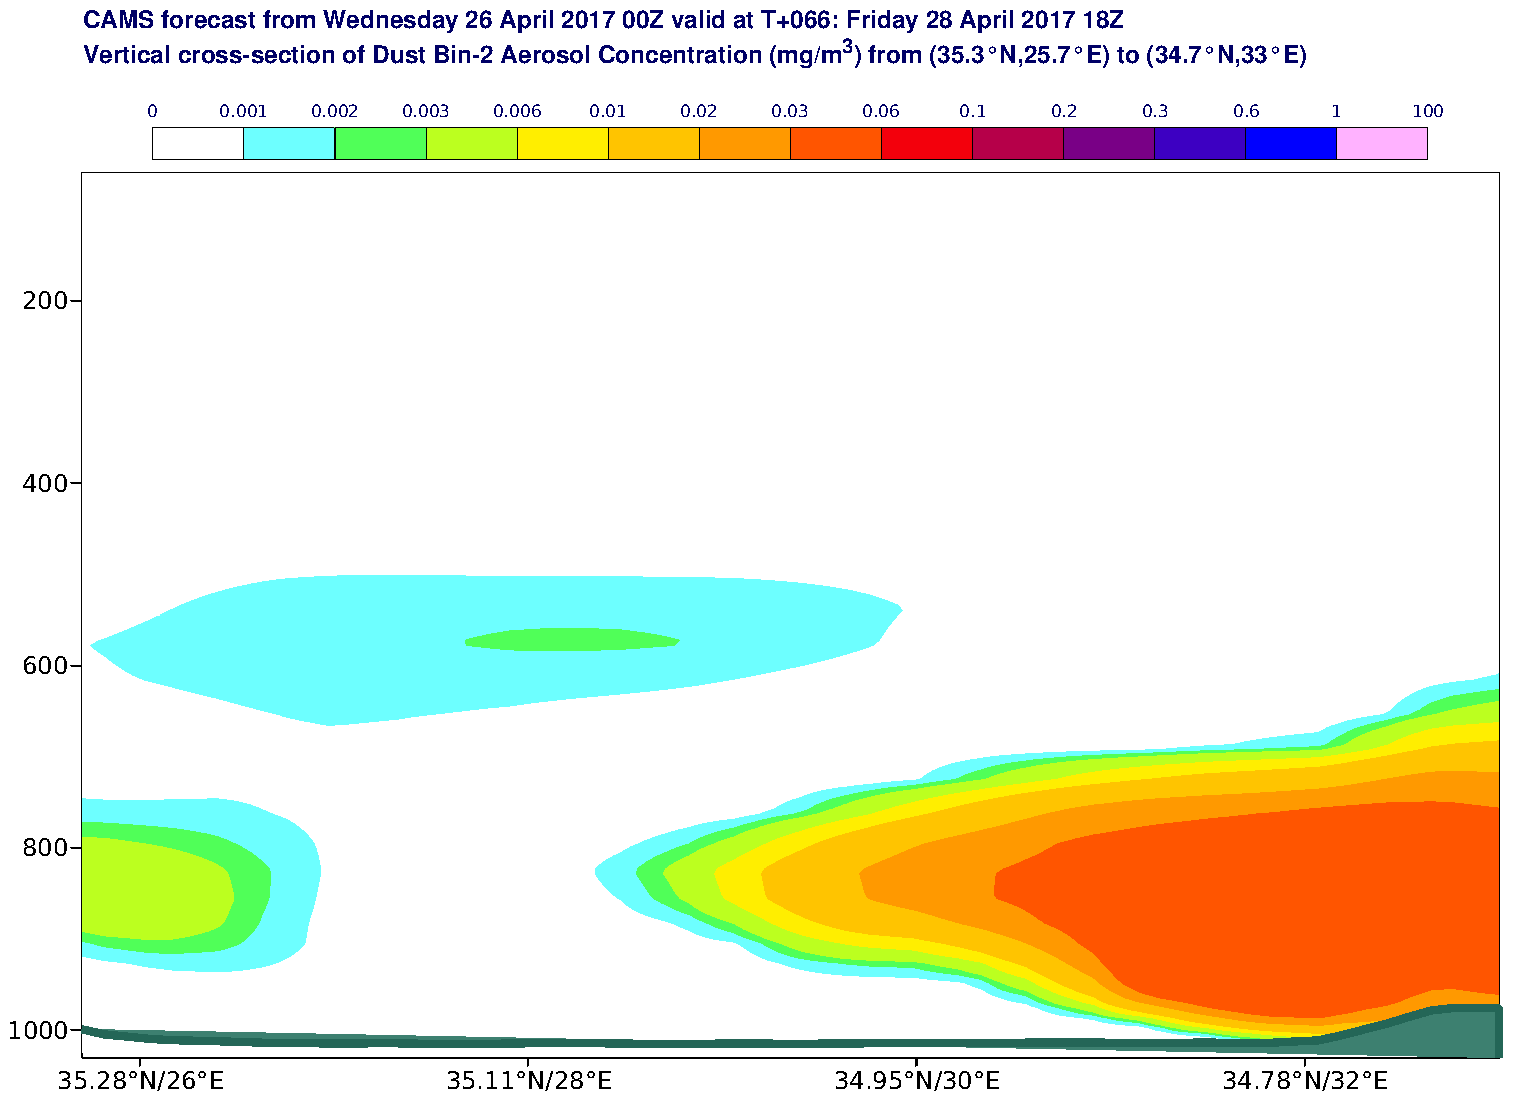 Vertical cross-section of Dust Bin-2 Aerosol Concentration (mg/m3) valid at T66 - 2017-04-28 18:00